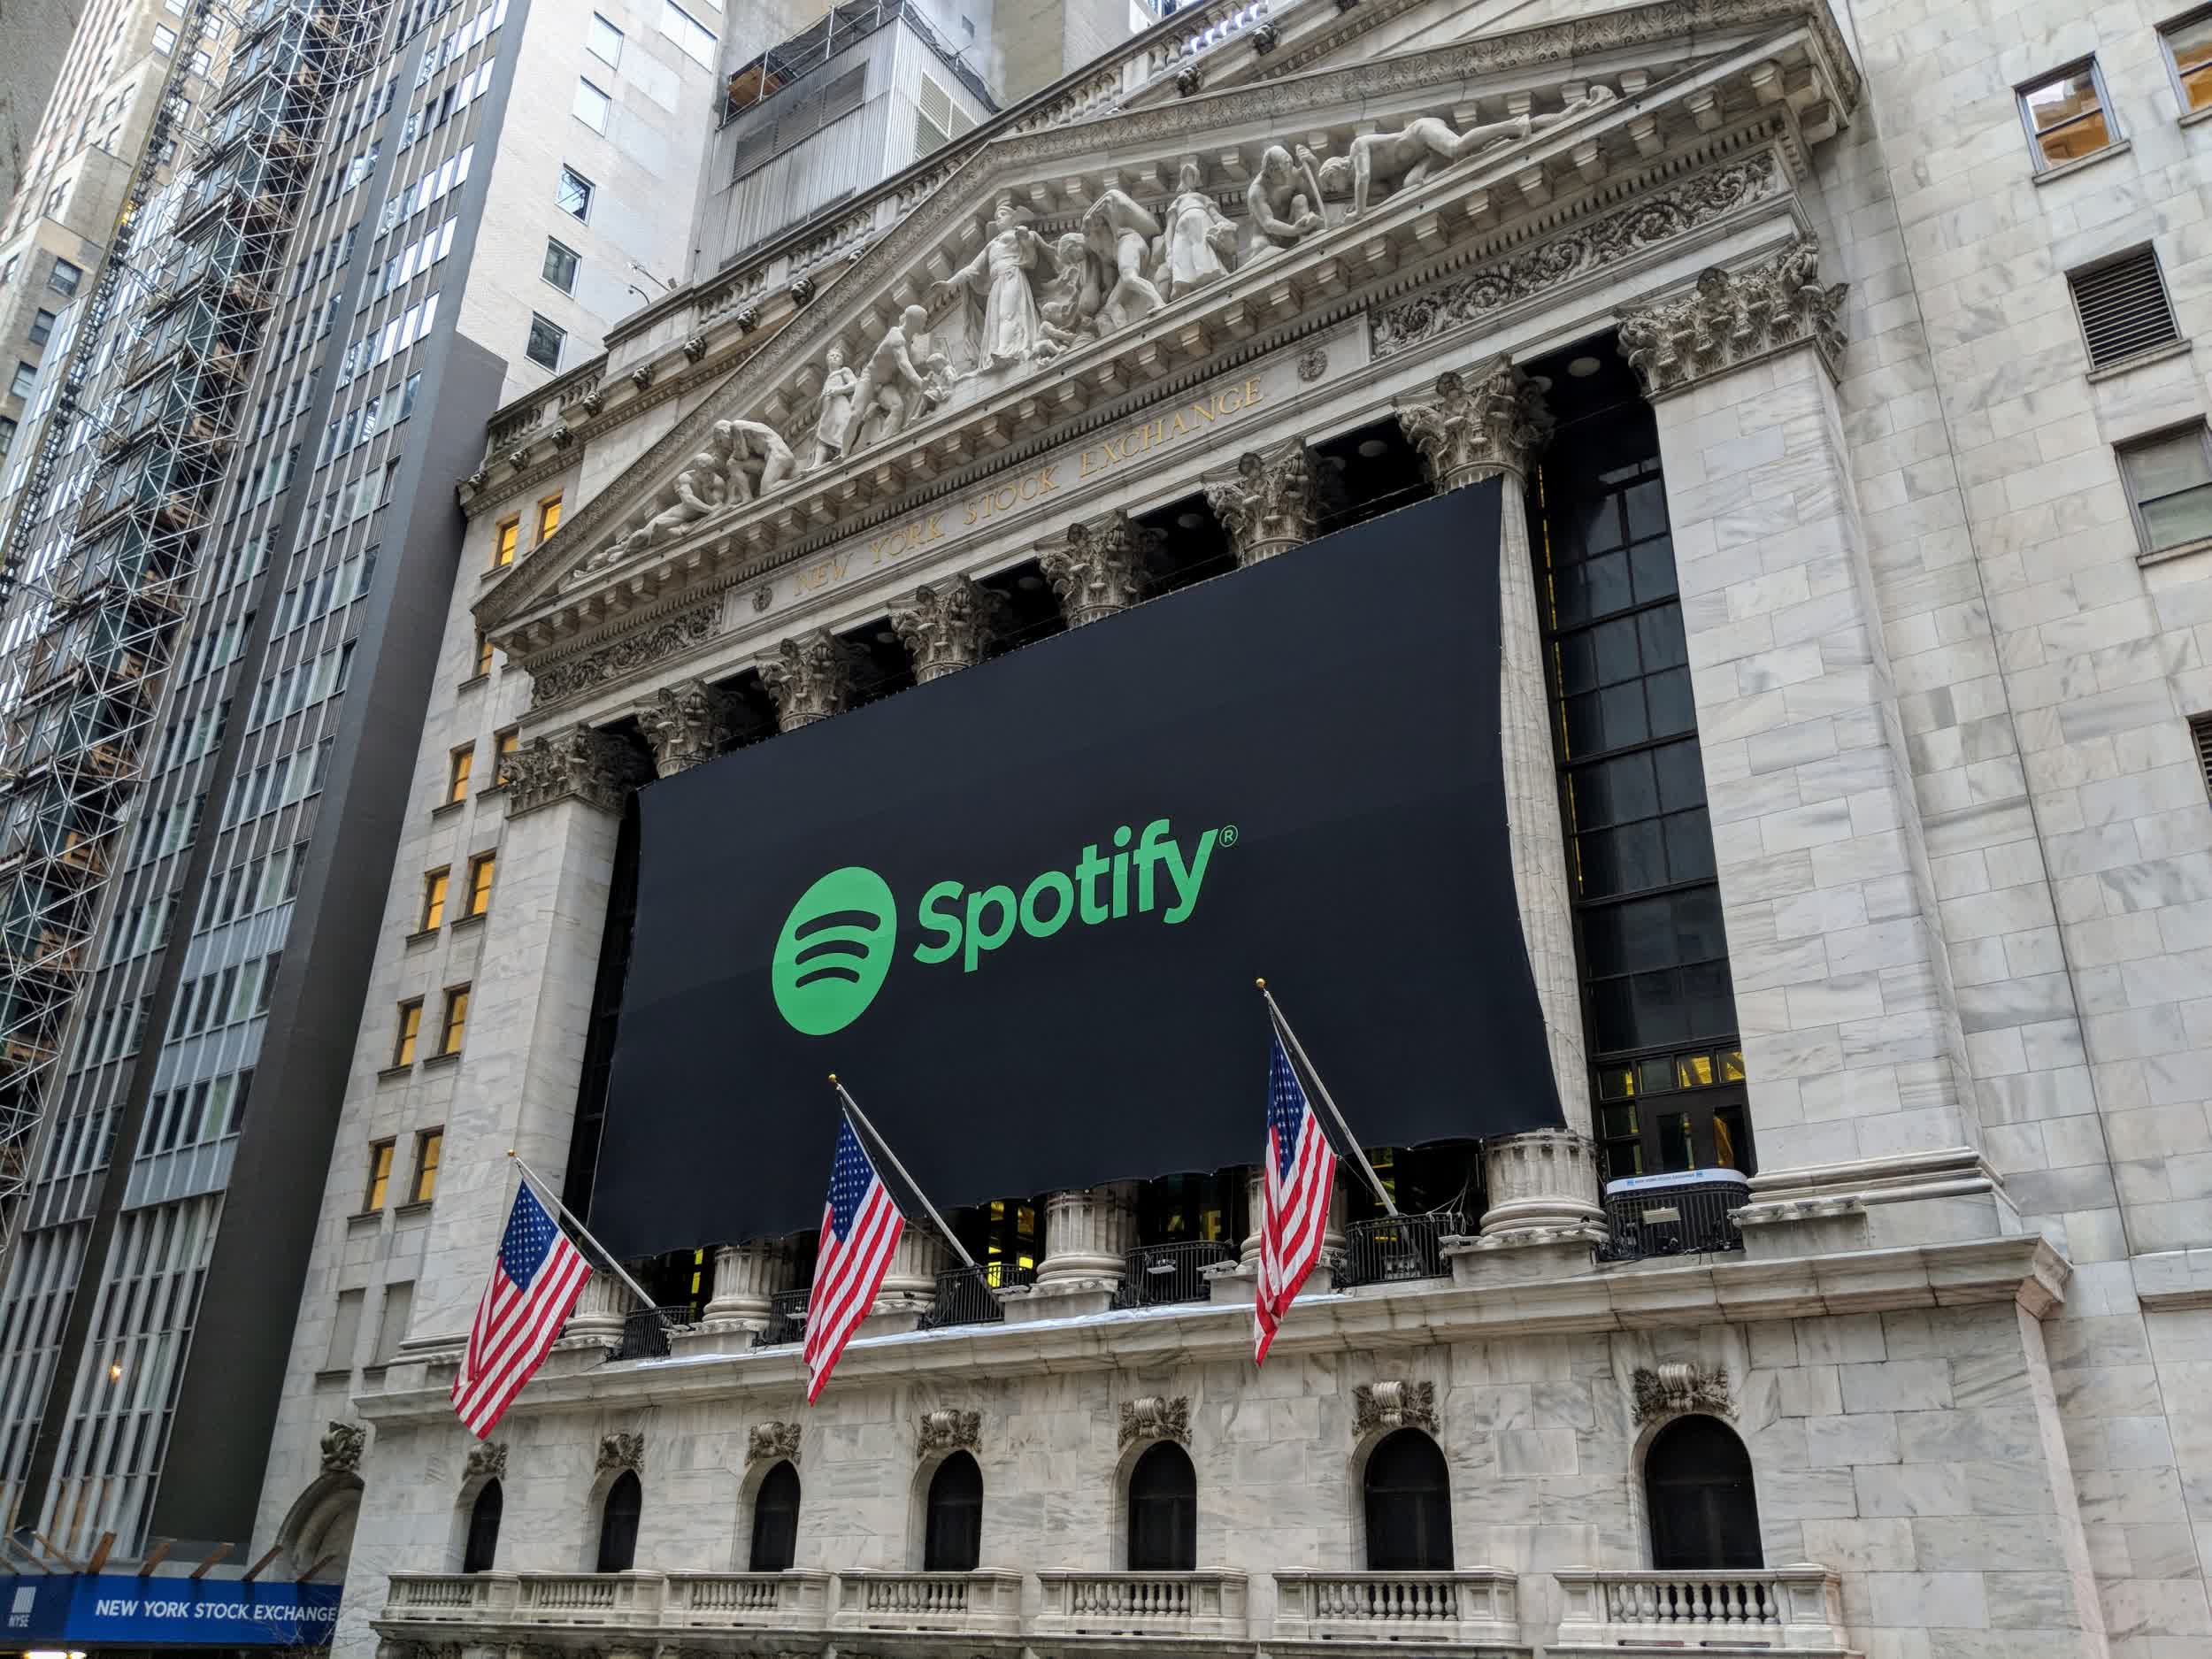 Spotify soars to 320 million monthly active users as growth accelerates